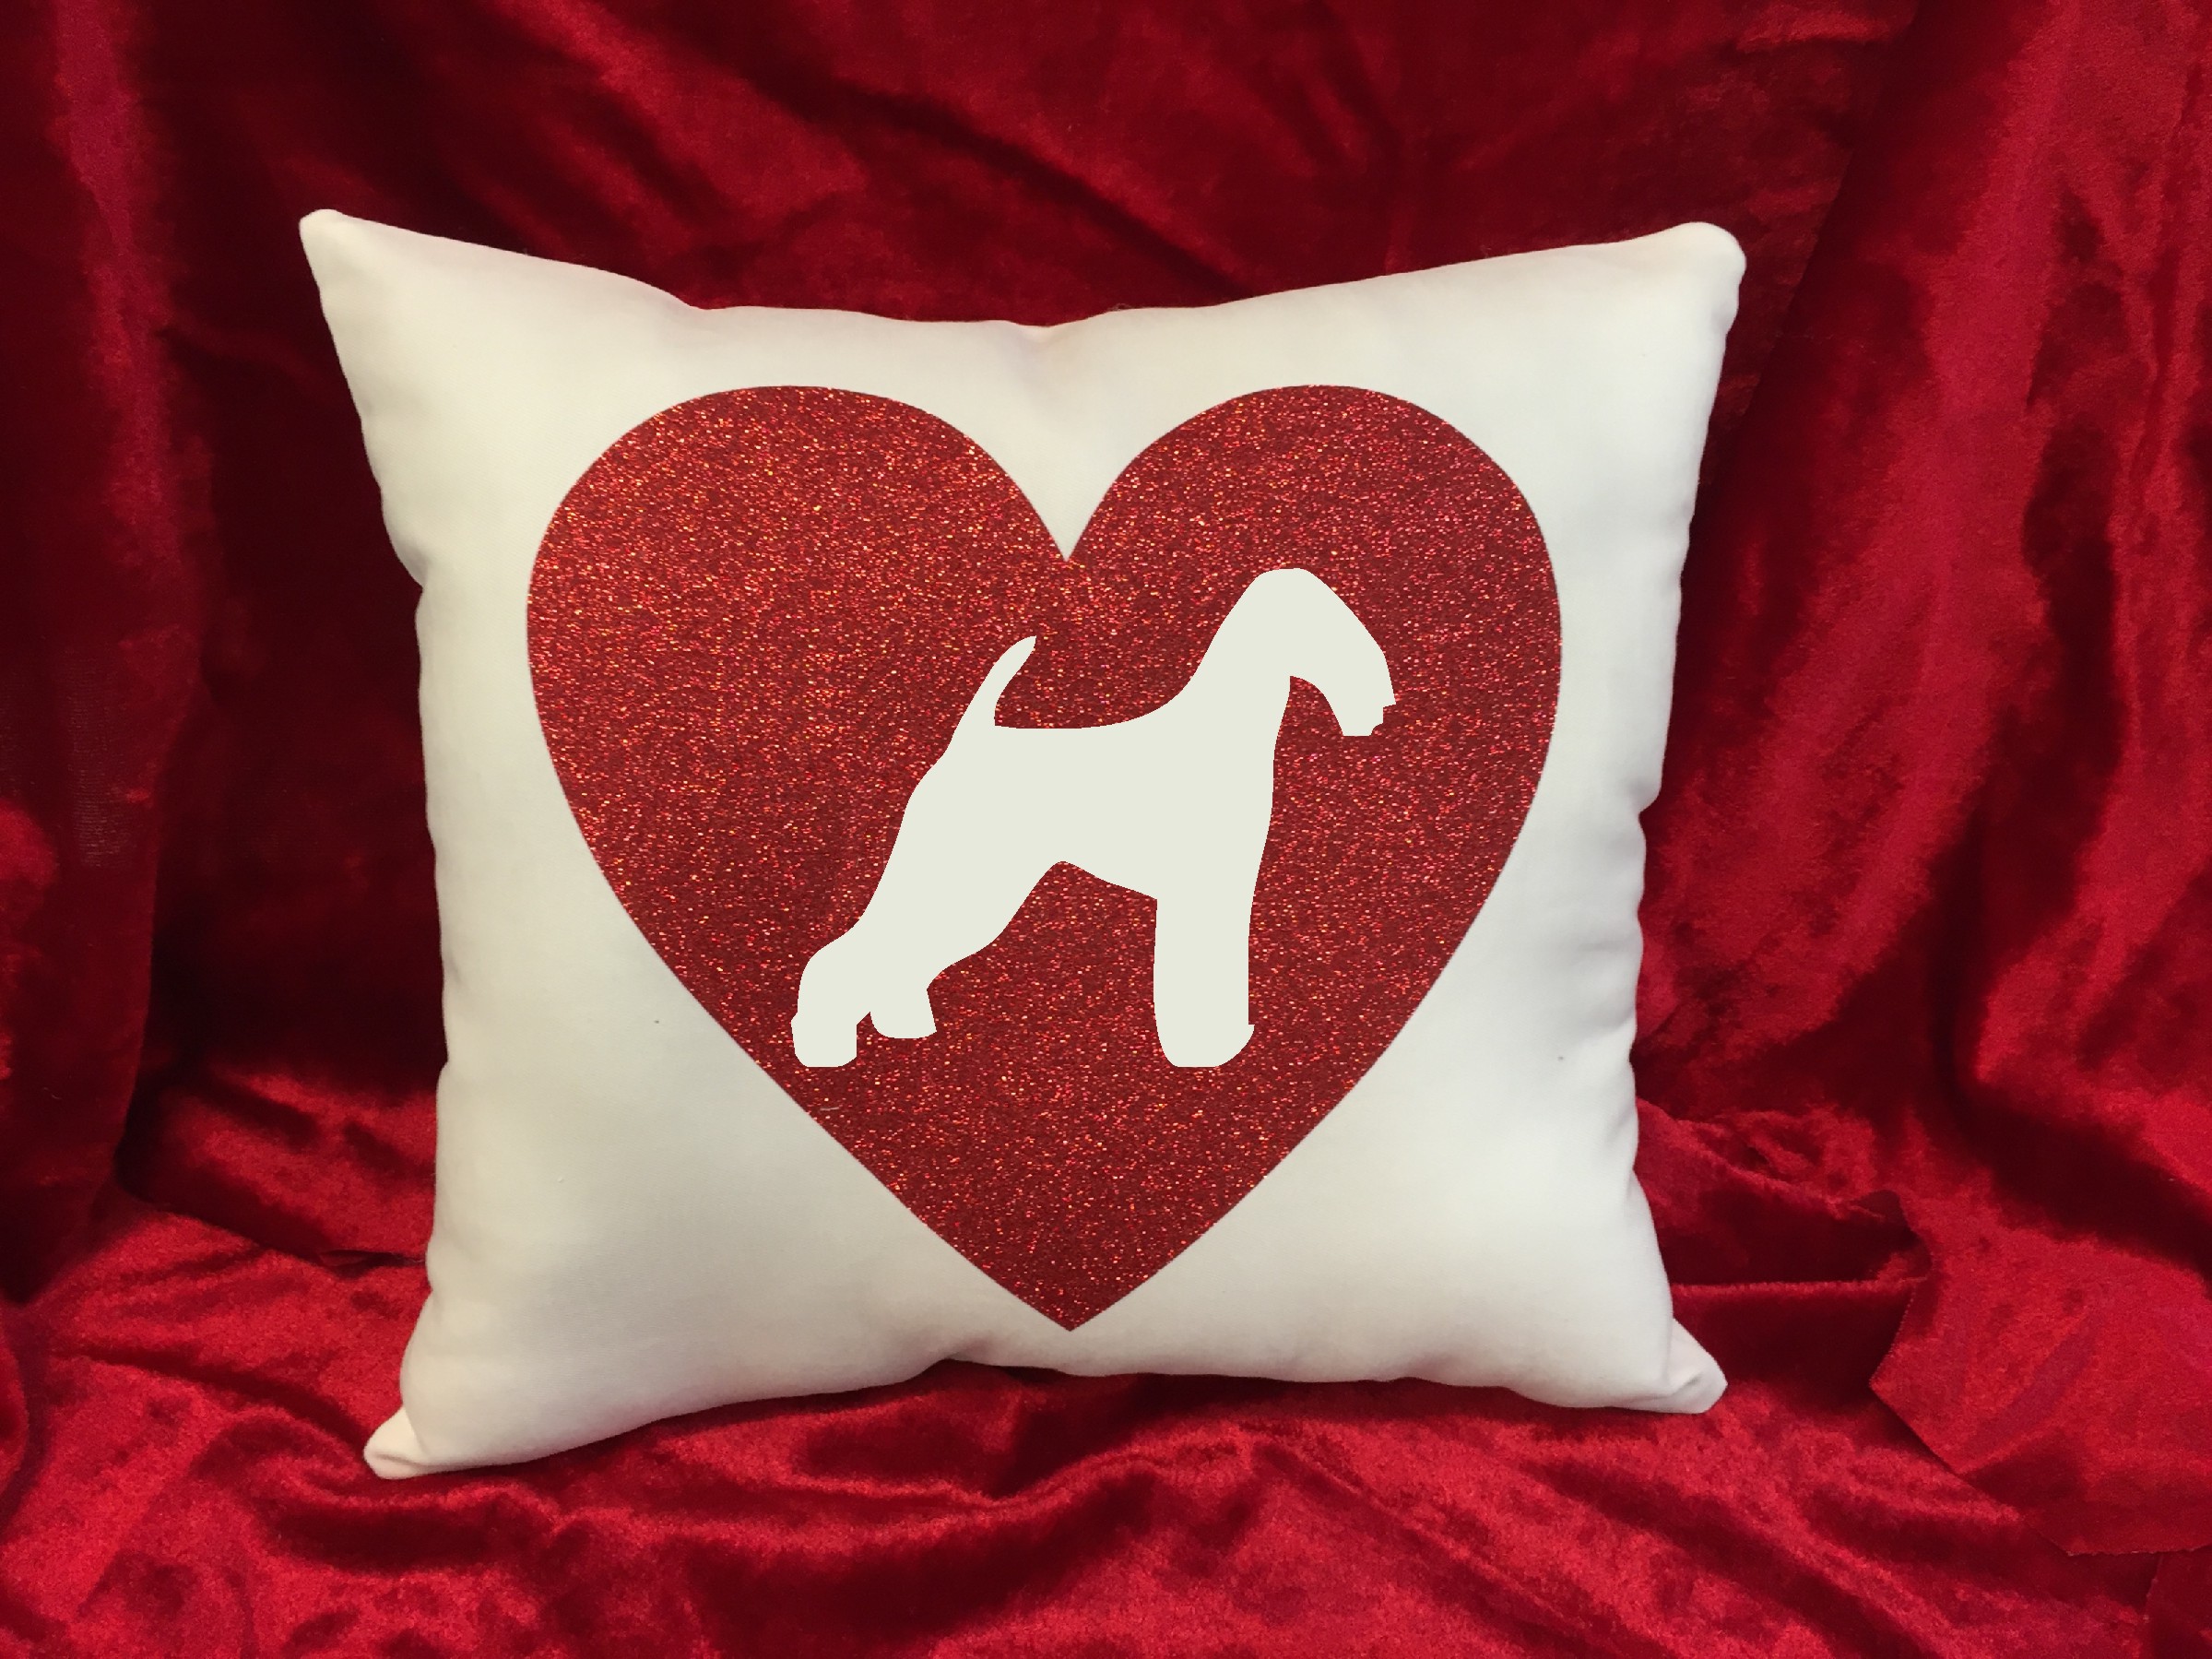 Dogs - Throw Pillow - Airedale Terrier